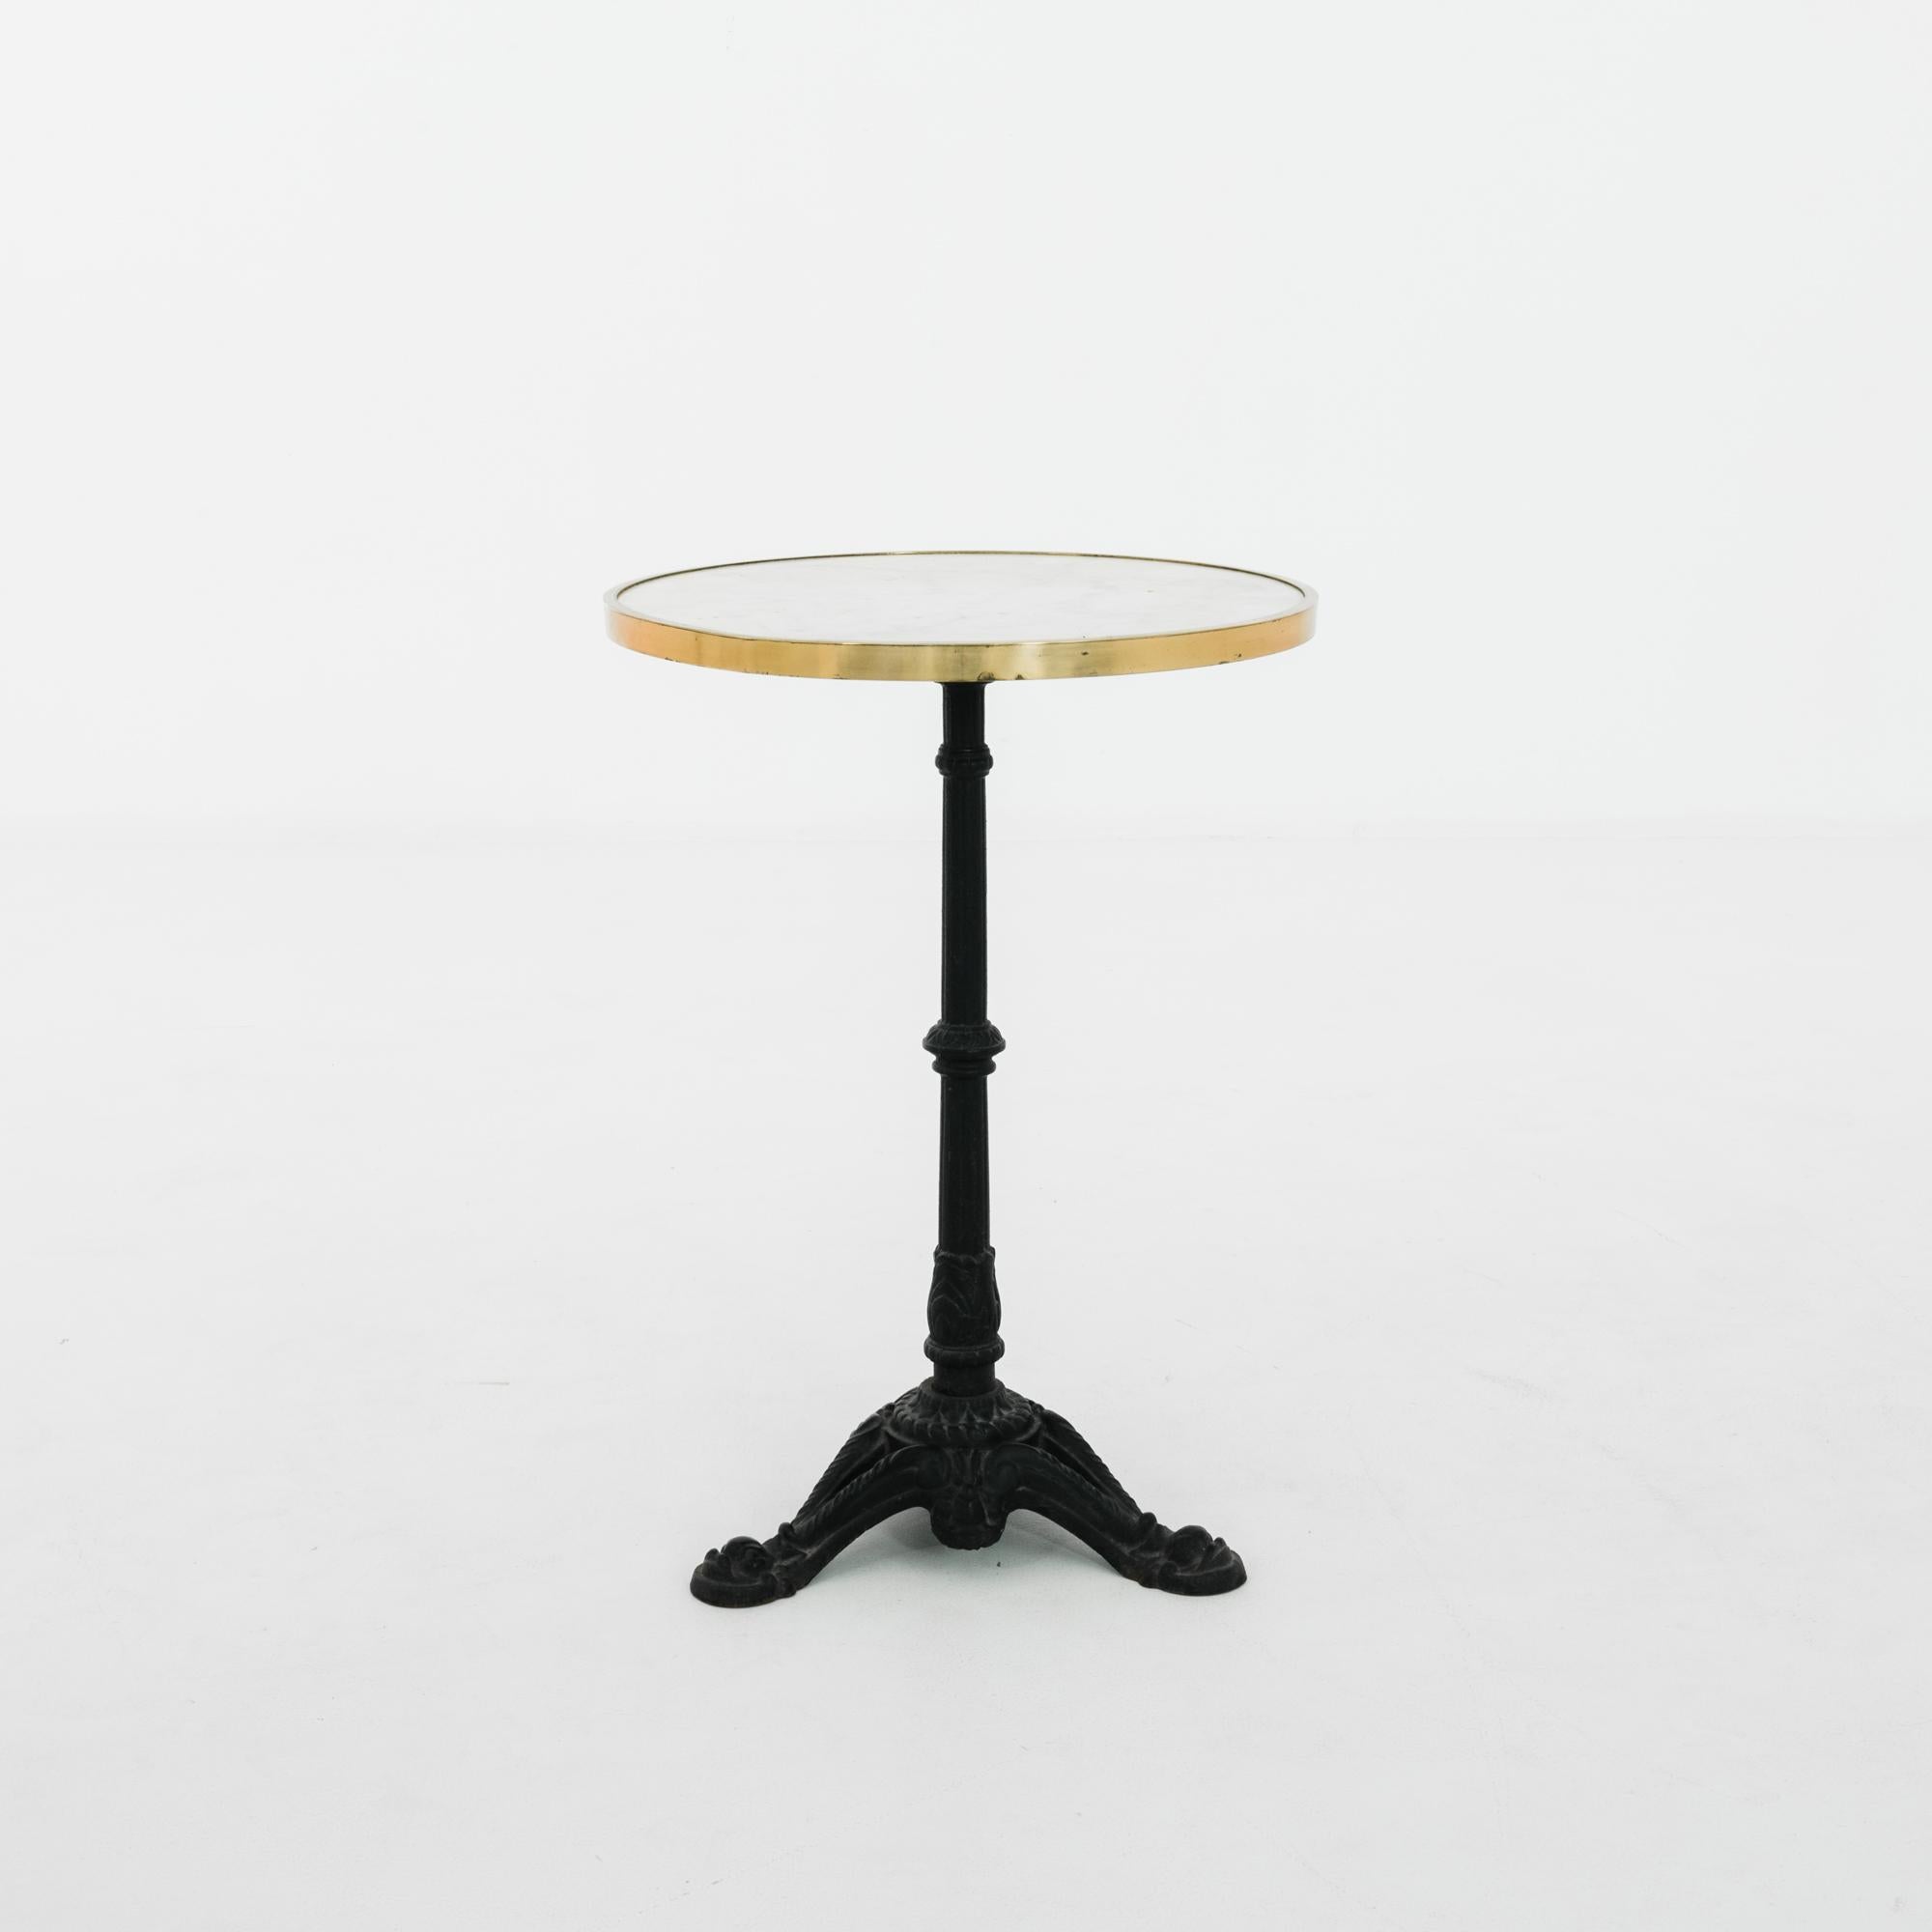 A cast-iron table from 1960s France with an elegant bistro aesthetic. The profile of the cast iron column, set atop embellished tripod feet, creates a graceful support for a round marble tabletop, ringed with brass. The subtle grey veining of the